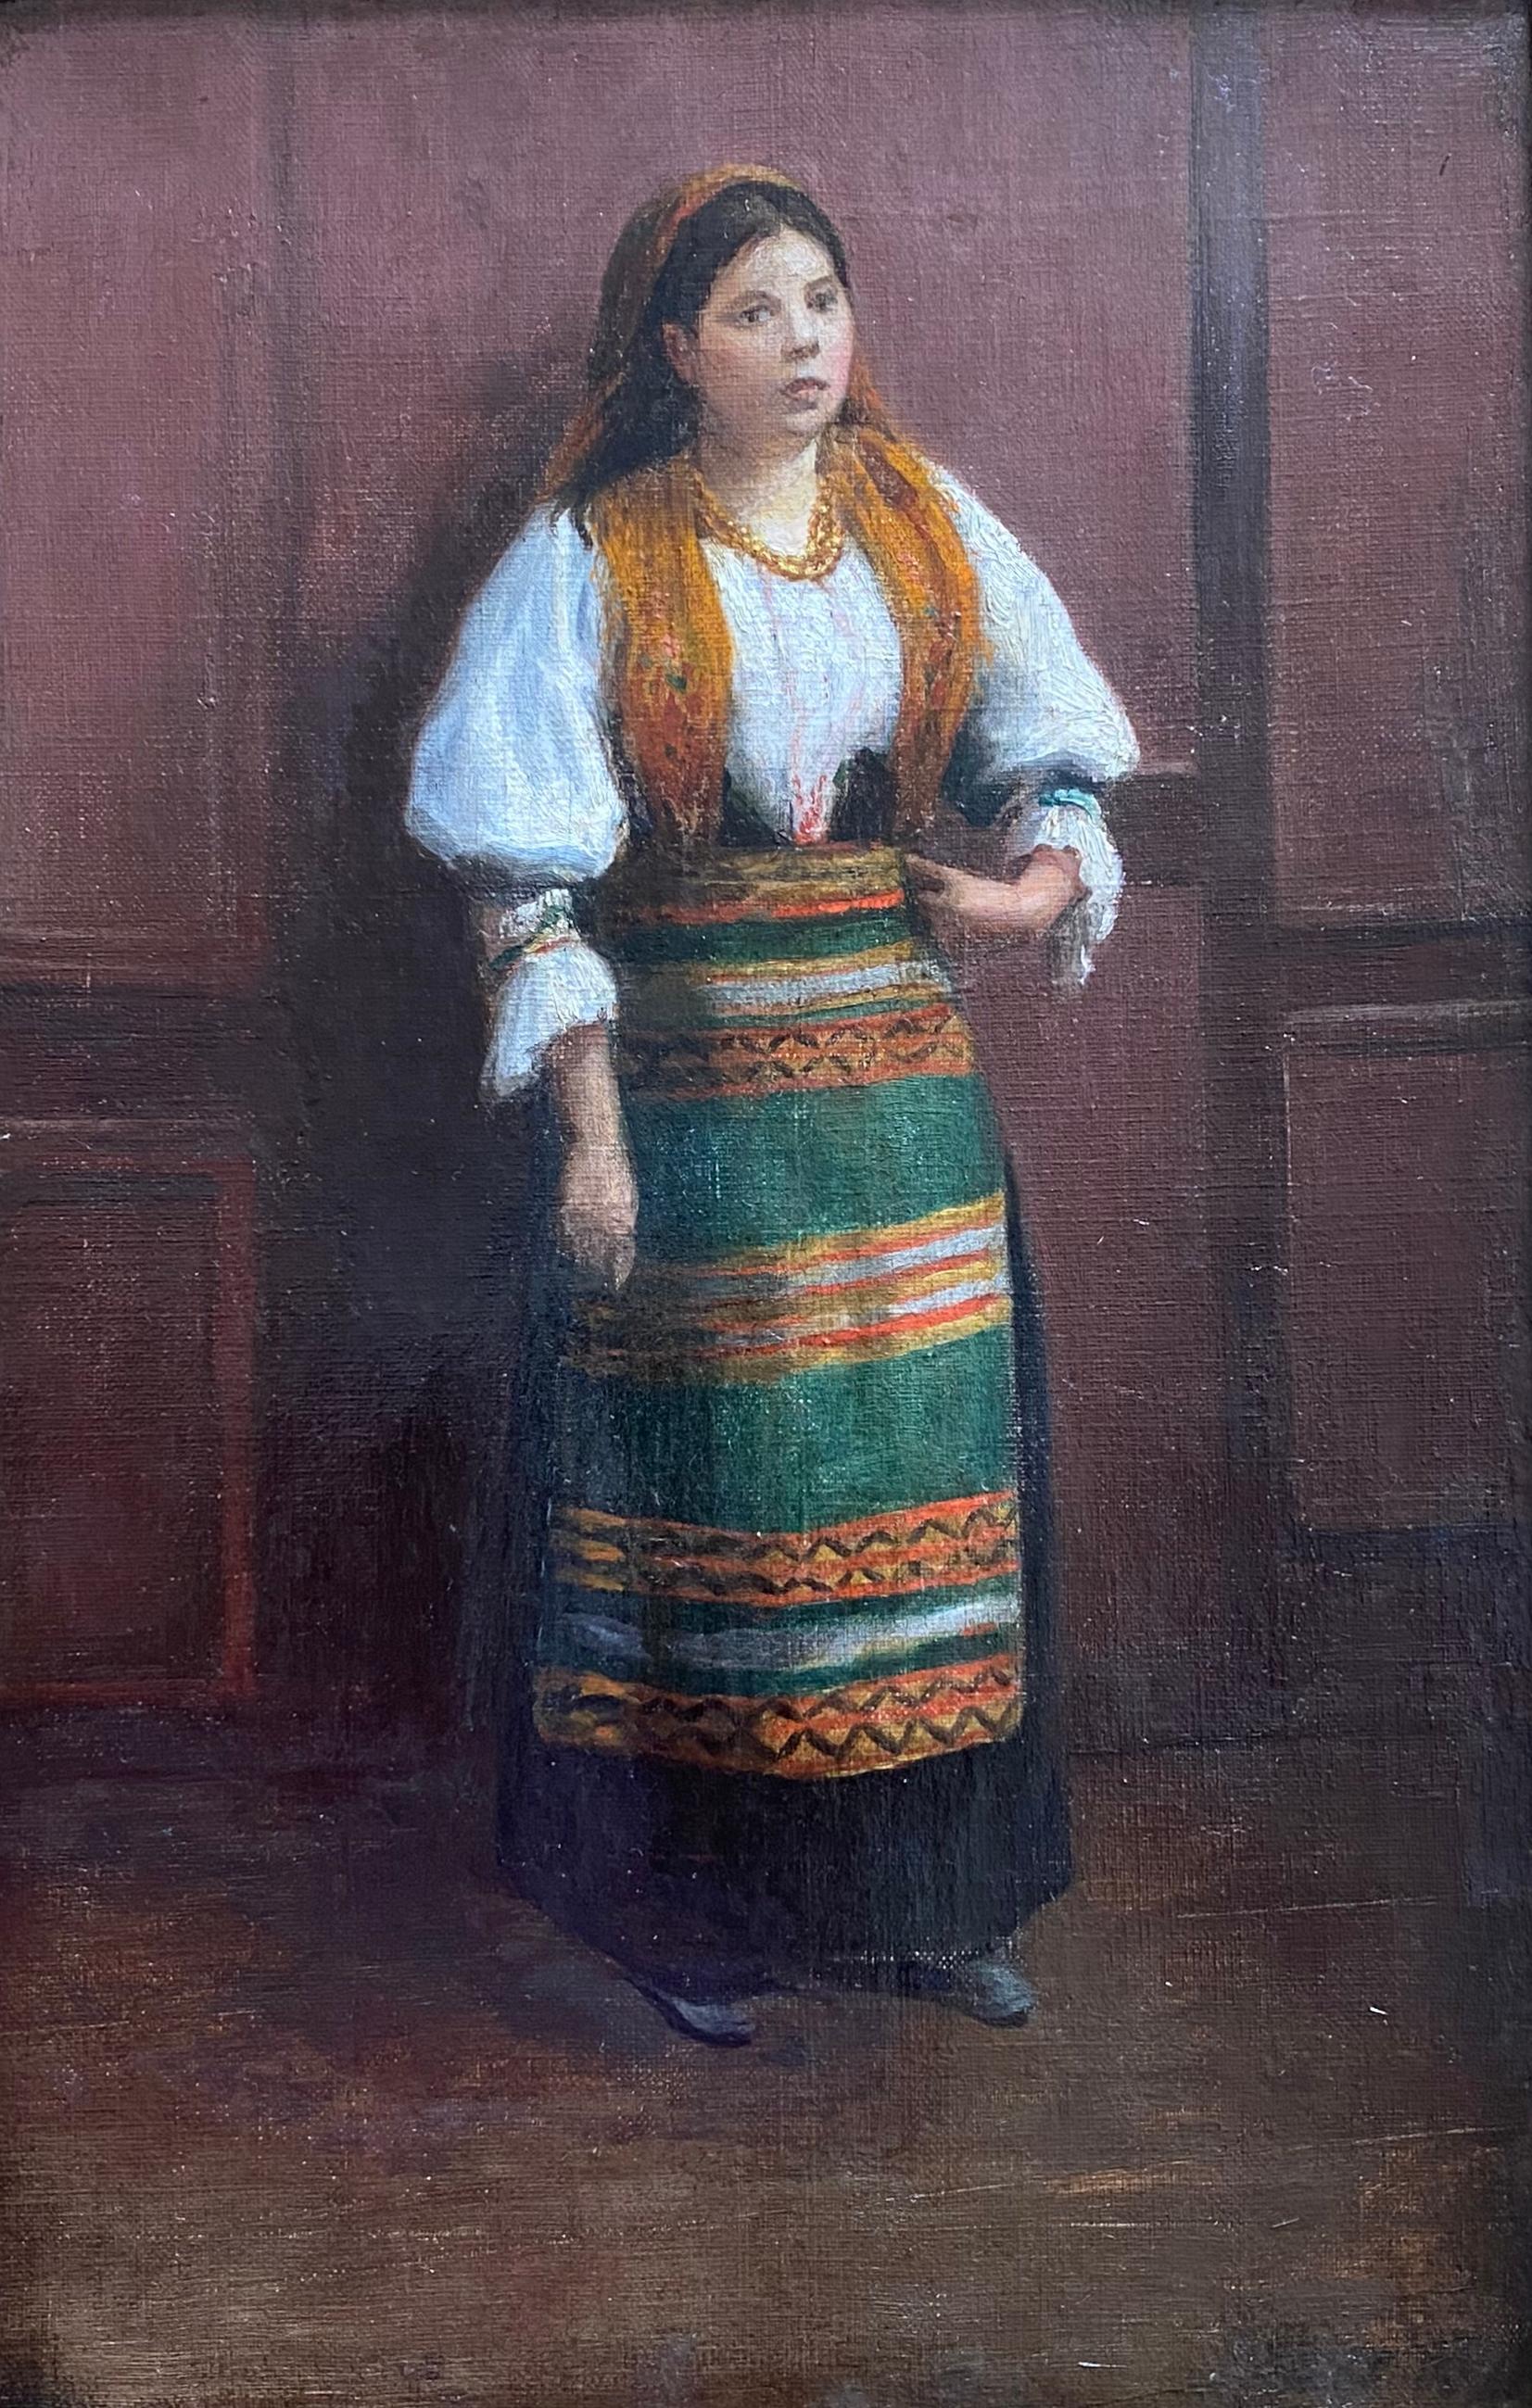 The first time model: the enigmatic young bohemian girl in traditional dress   – Painting von Unknown